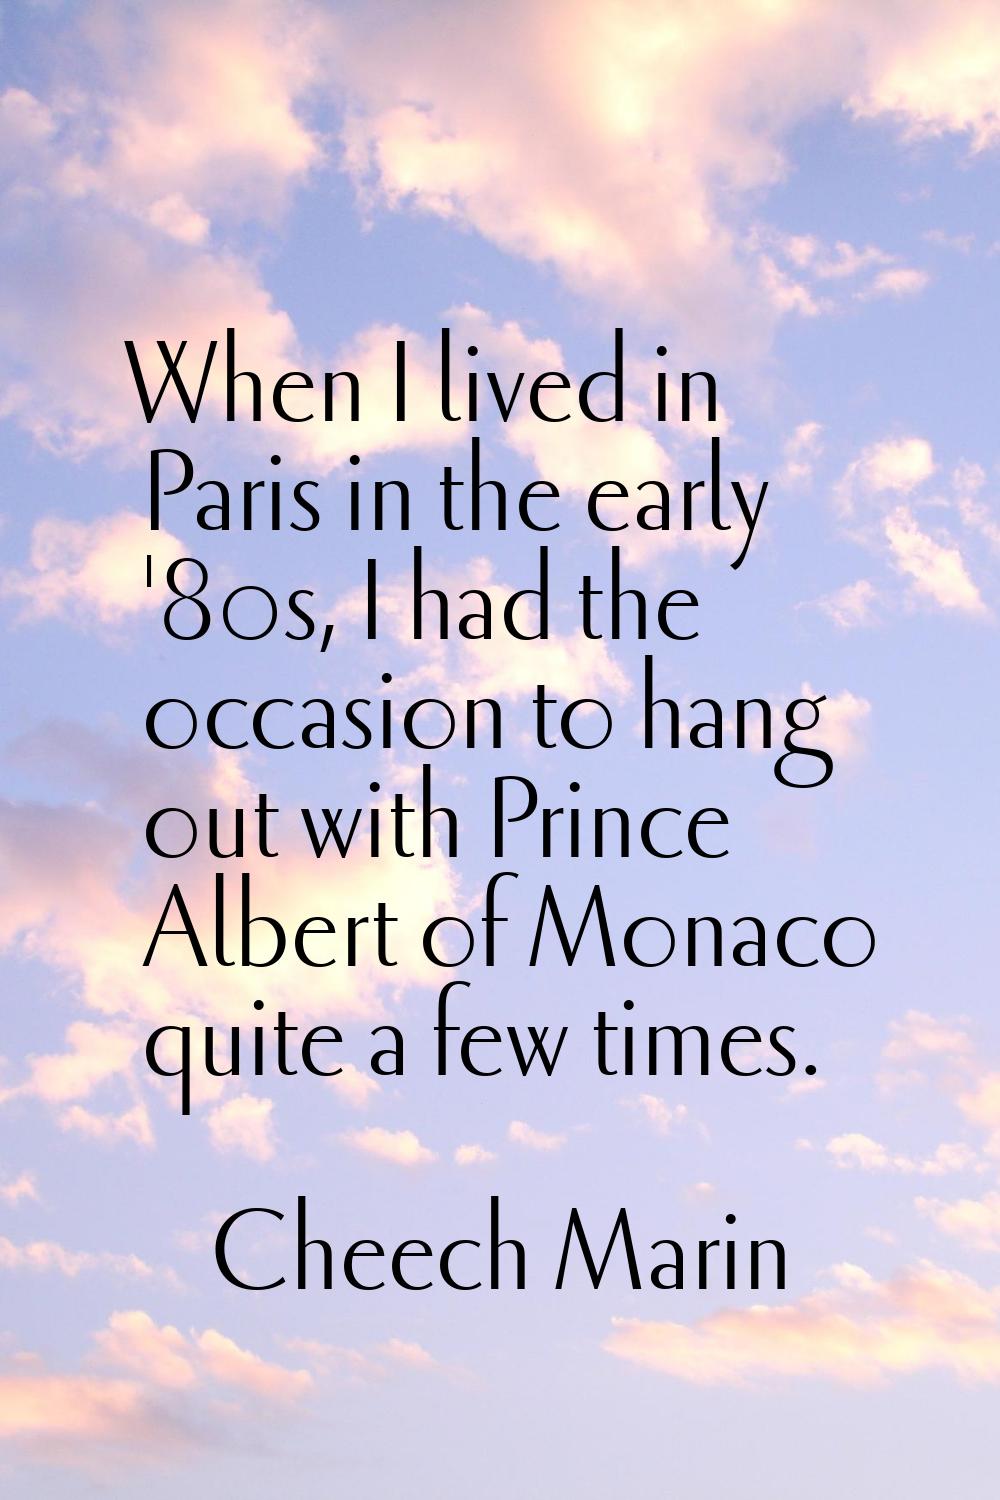 When I lived in Paris in the early '80s, I had the occasion to hang out with Prince Albert of Monac